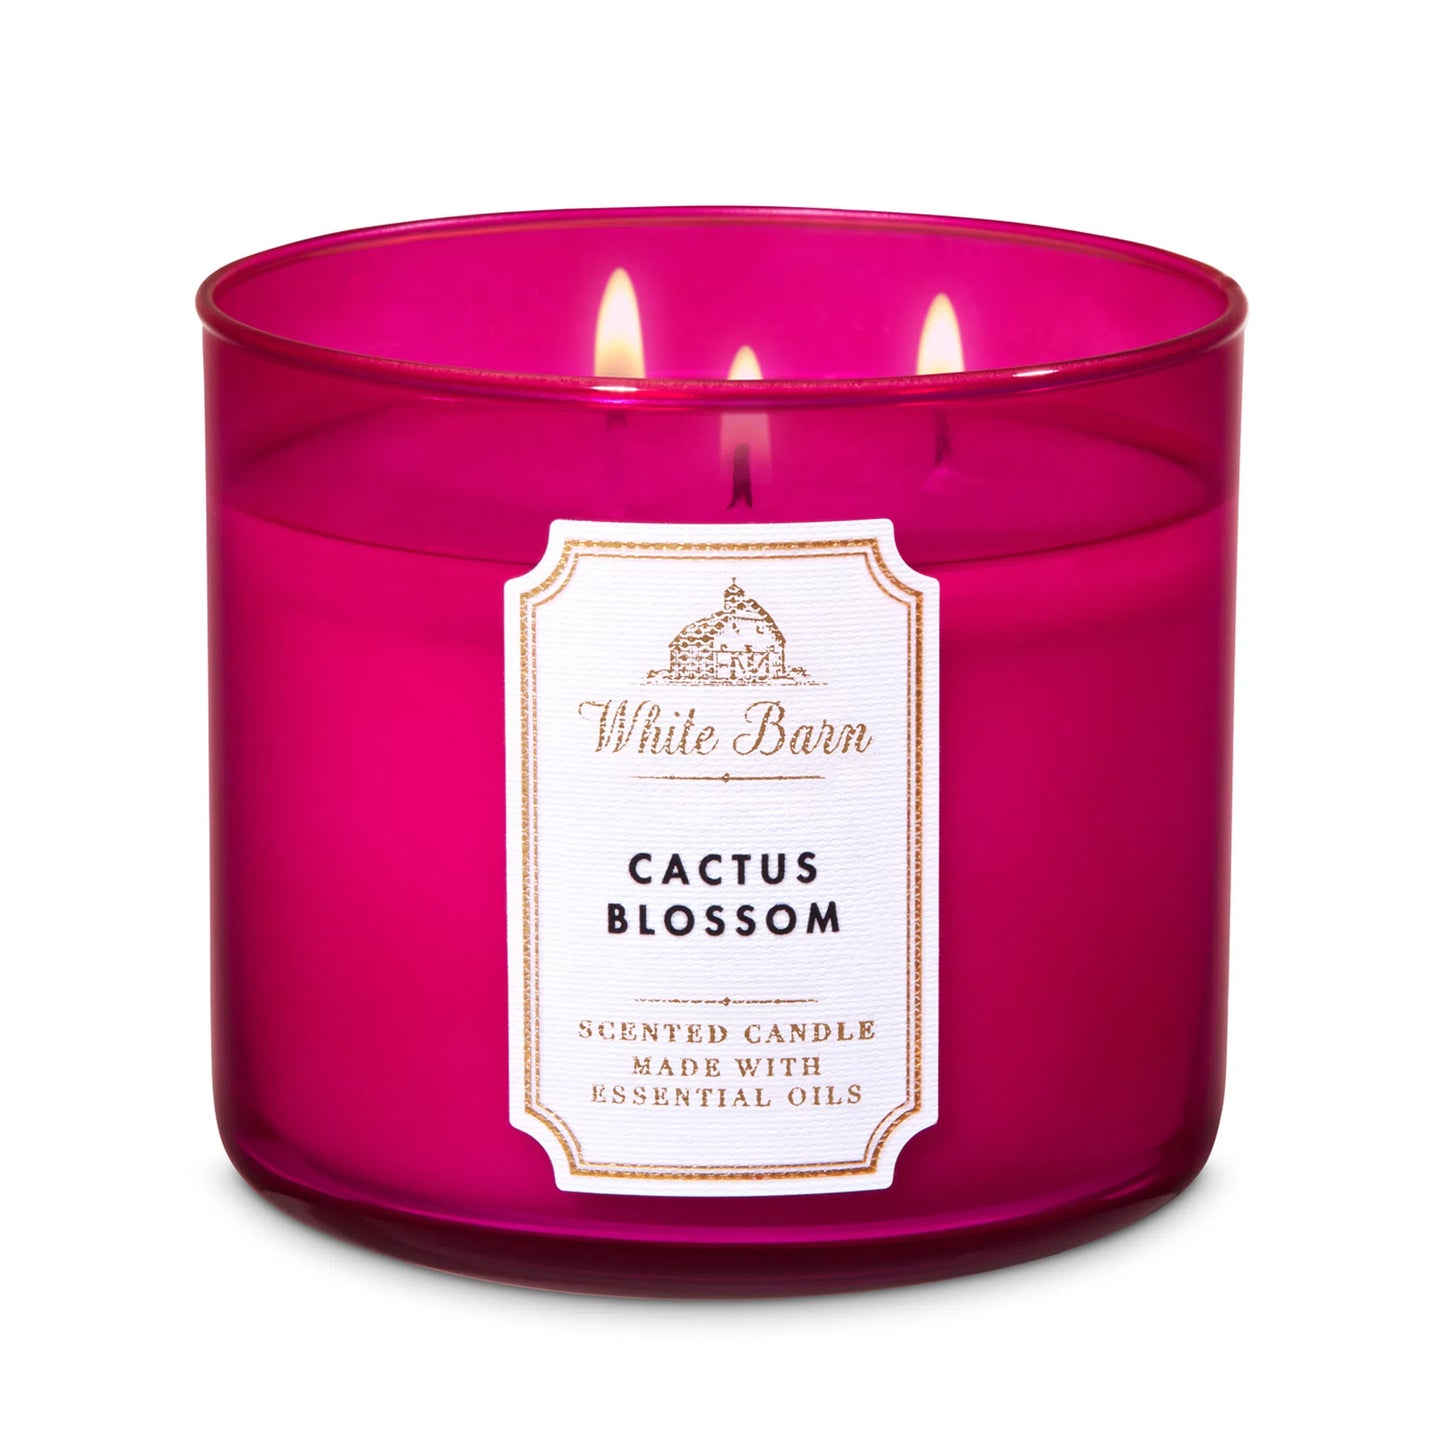 Bath & Body Works White Barn, Cactus Blossom 3-Wick Scented Candle 14.5 oz